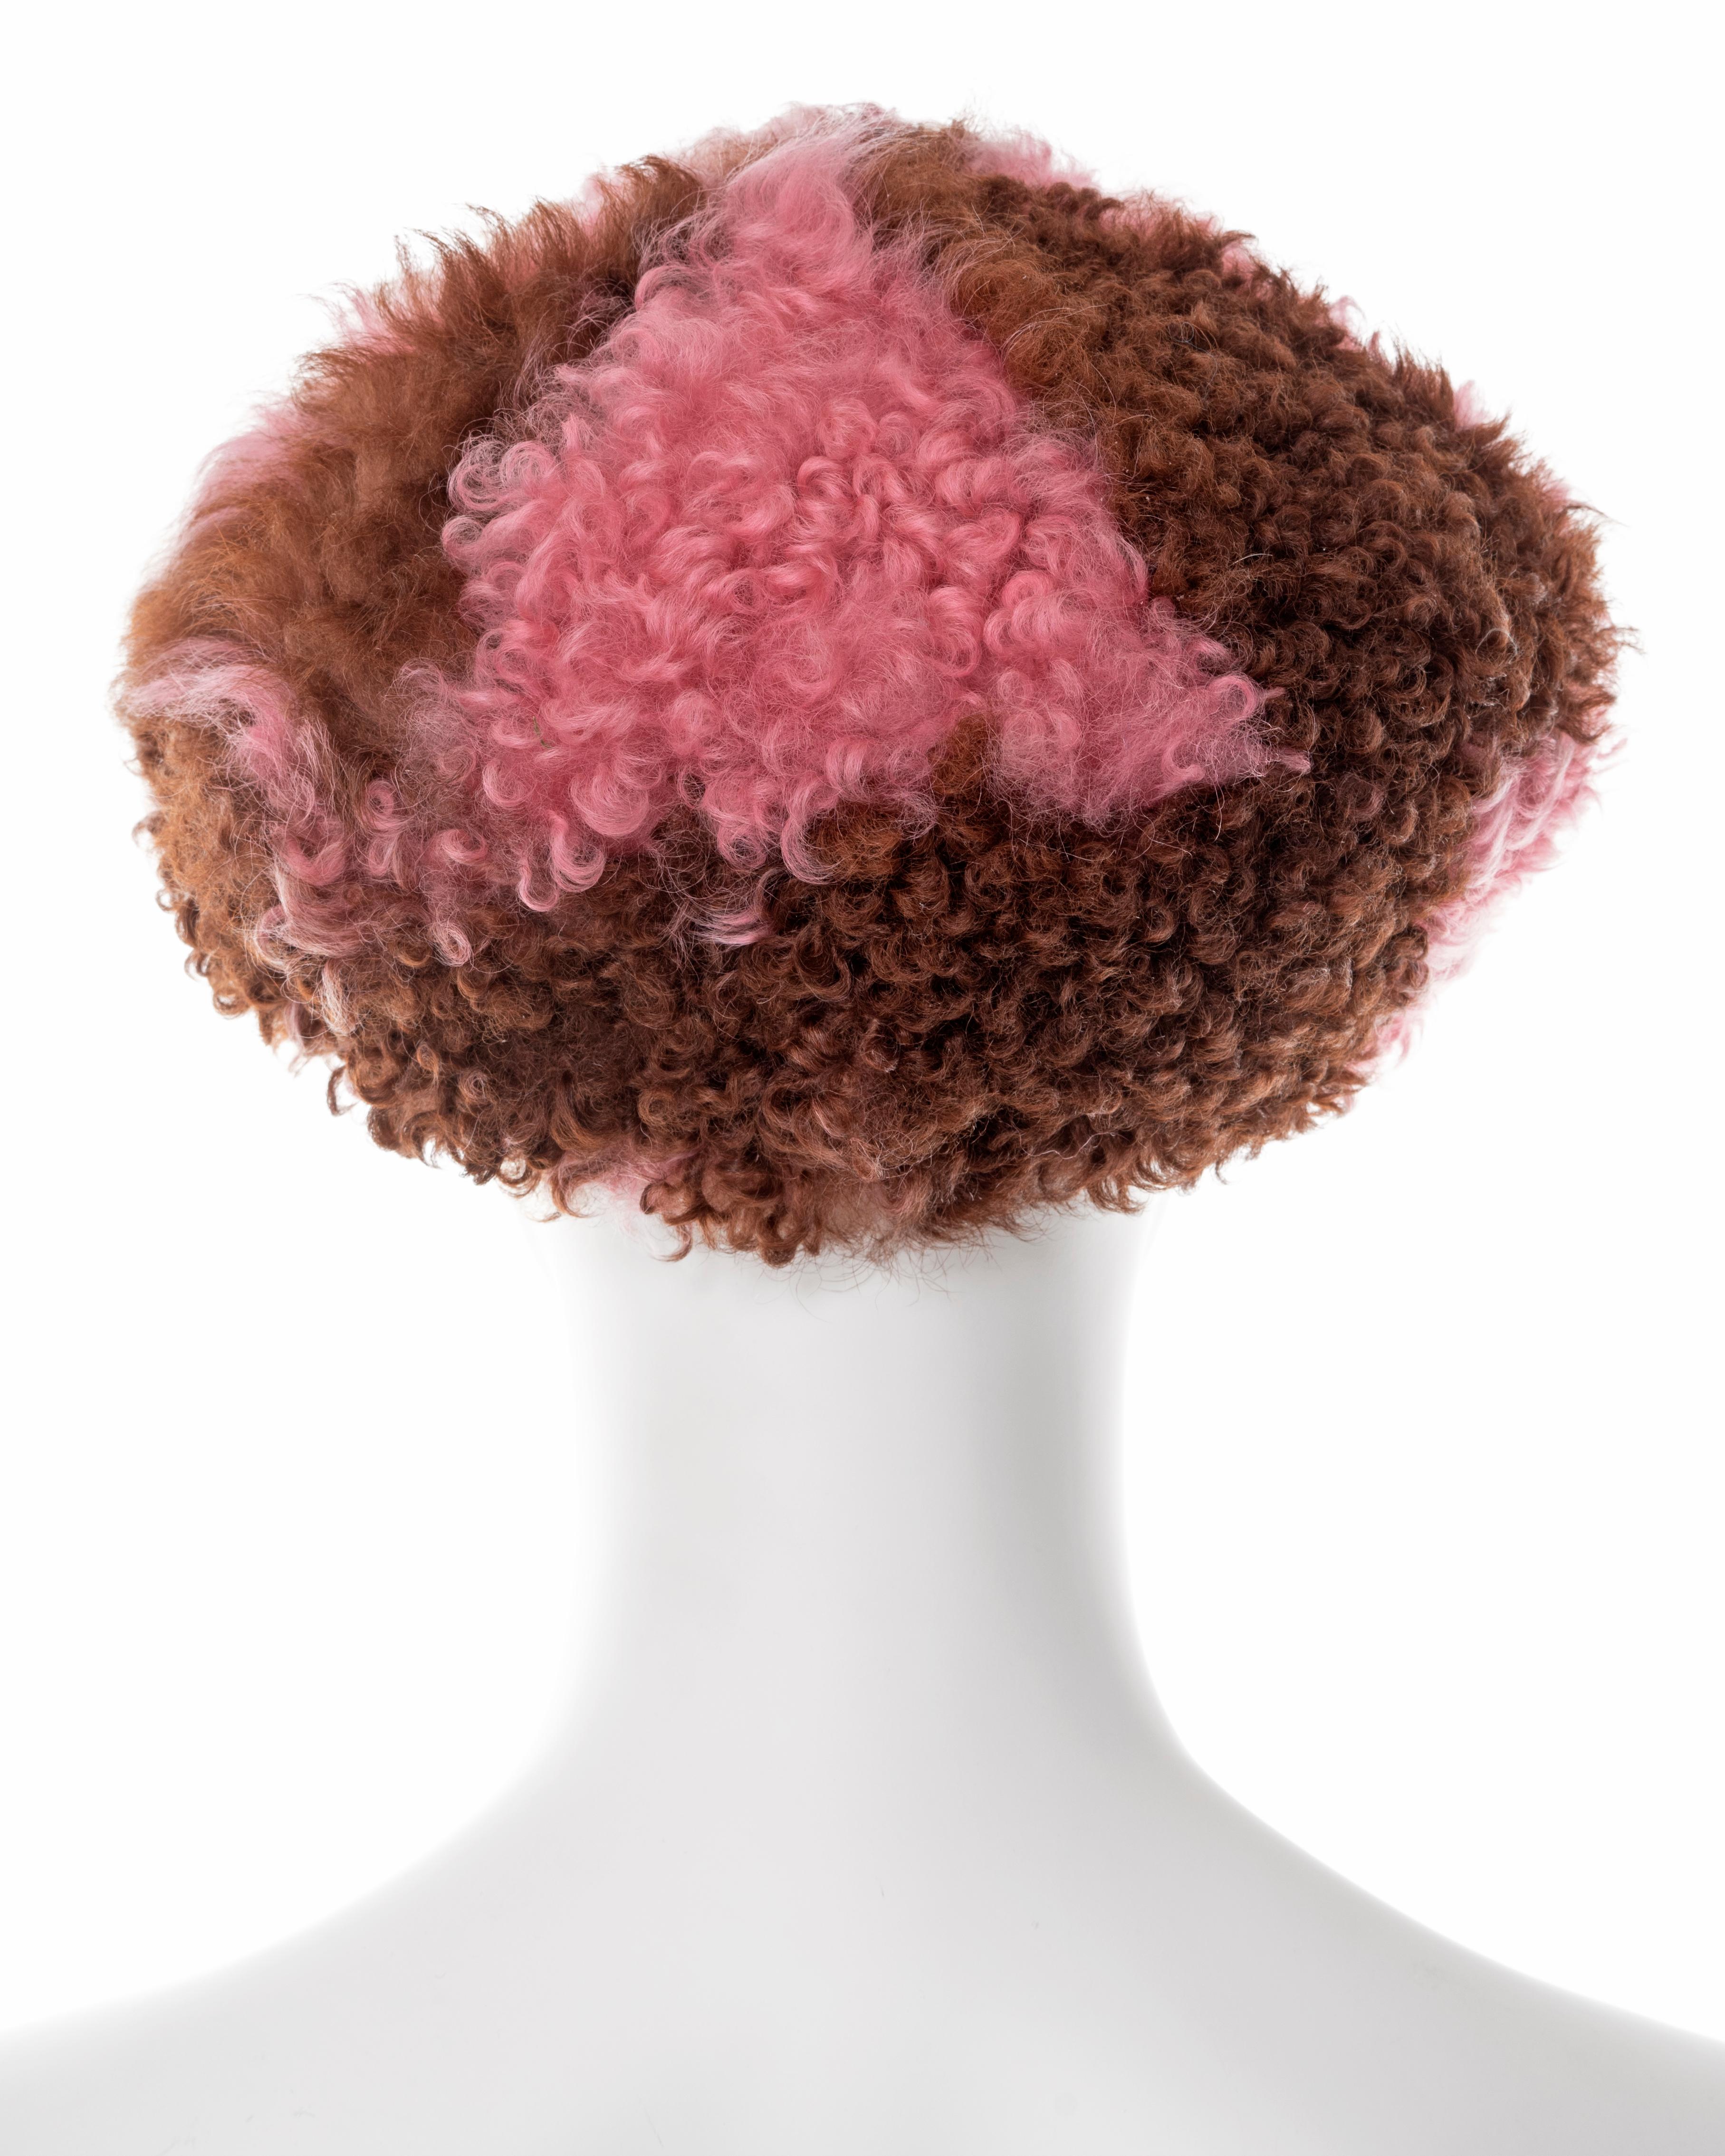 Women's Prada pink and brown curly shearling 'newsboy' hat, fw 2017